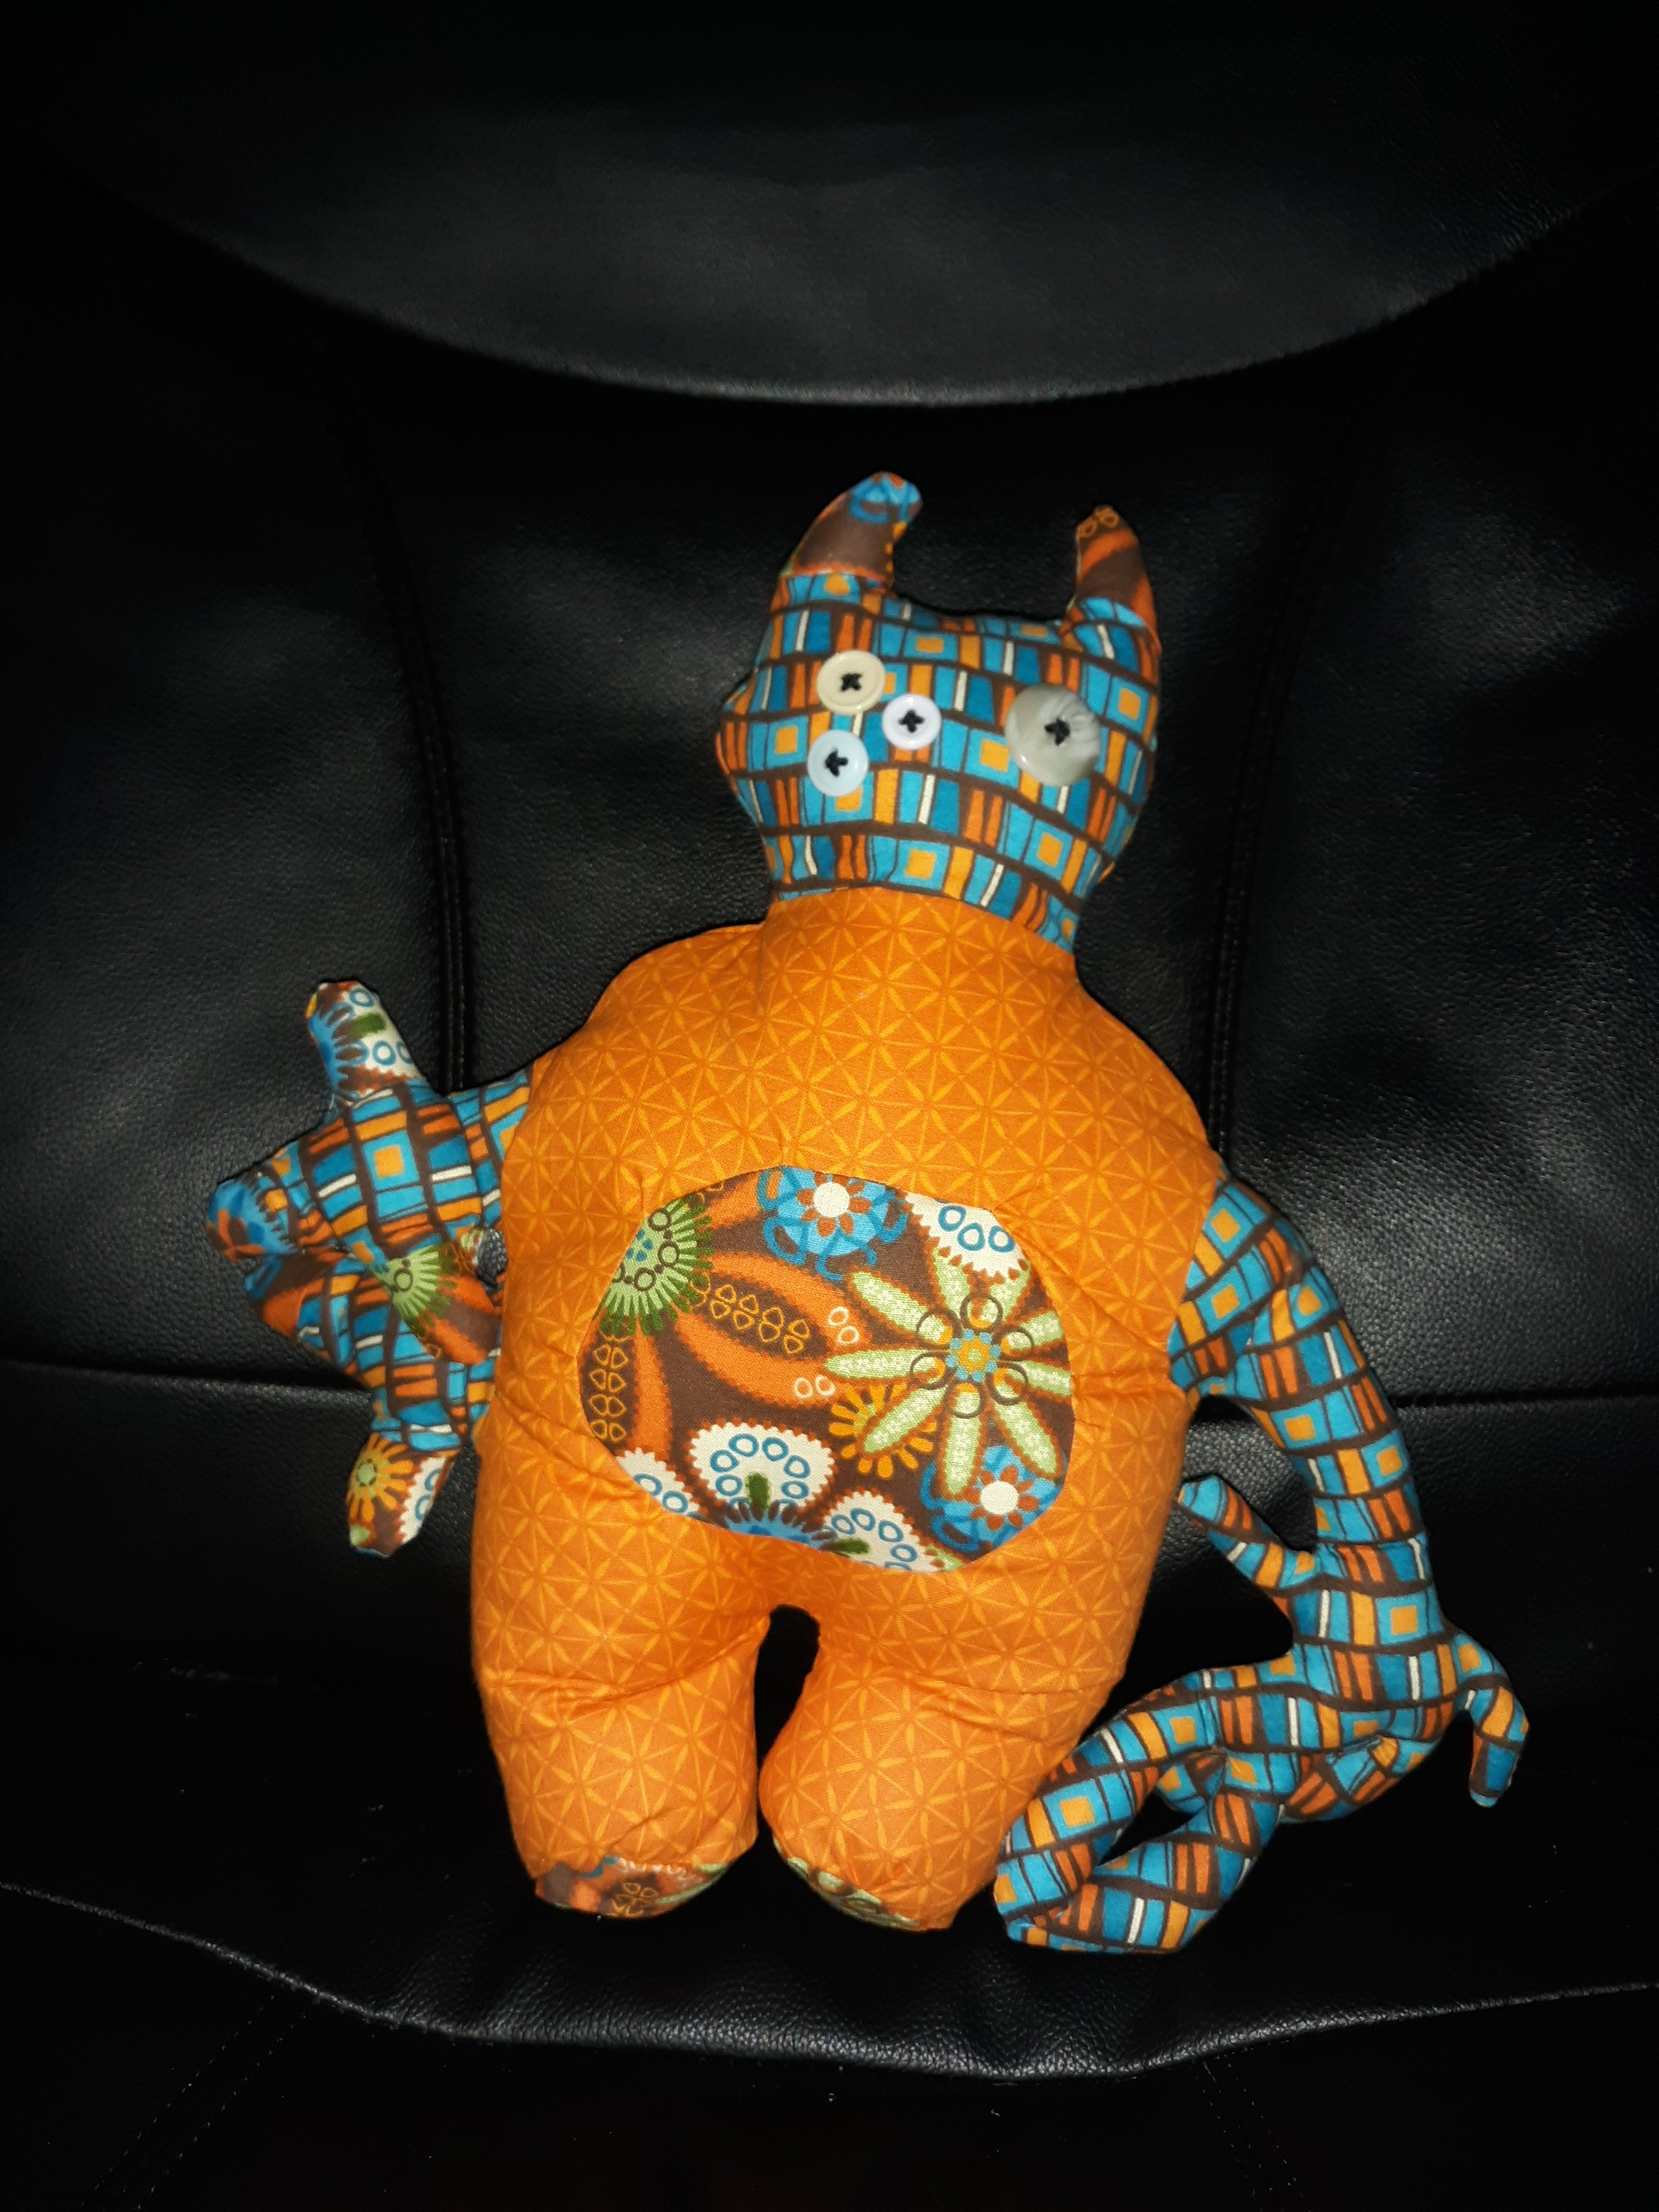 An orange doll standing on a black chair. They have a small head consisting of a brown, blue, yellow, and orange rectangle pattern. They have two horns sticking out and have three button eyes on the left of their face and one large button eye on the right of their face. Their body is orange with a brown floral pattern belly. They have two short stubby legs that are also orange. They have two short arms on the left side of their body and one very long arm on the left side of their body. Both arms have that rectangle pattern on them.